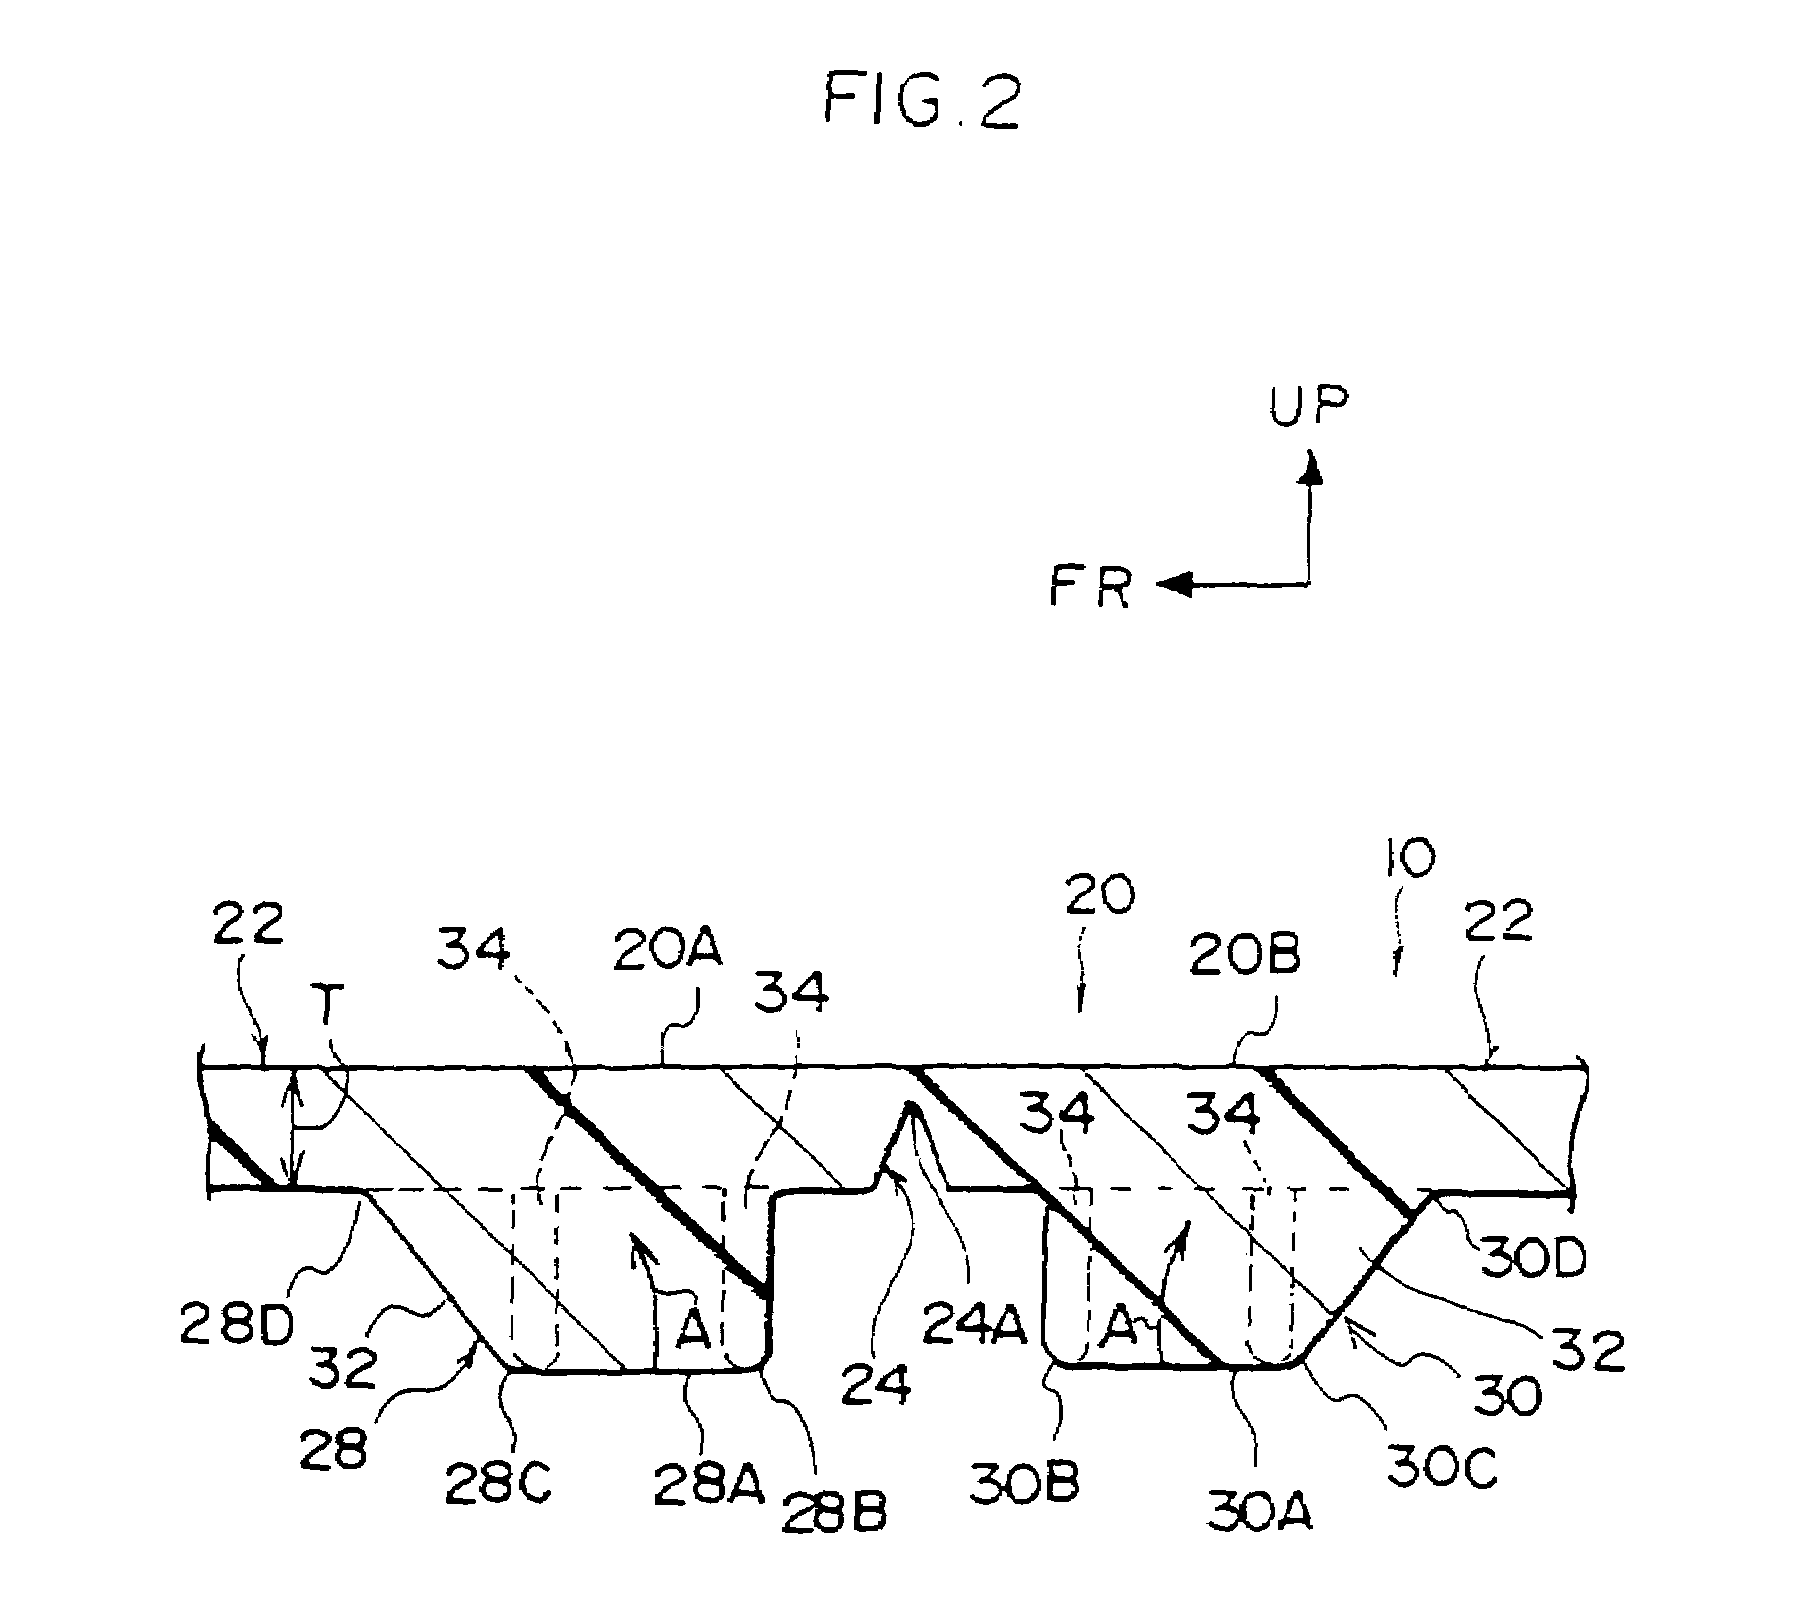 Interior member having an airbag door section for use in vehicles, and its molding method